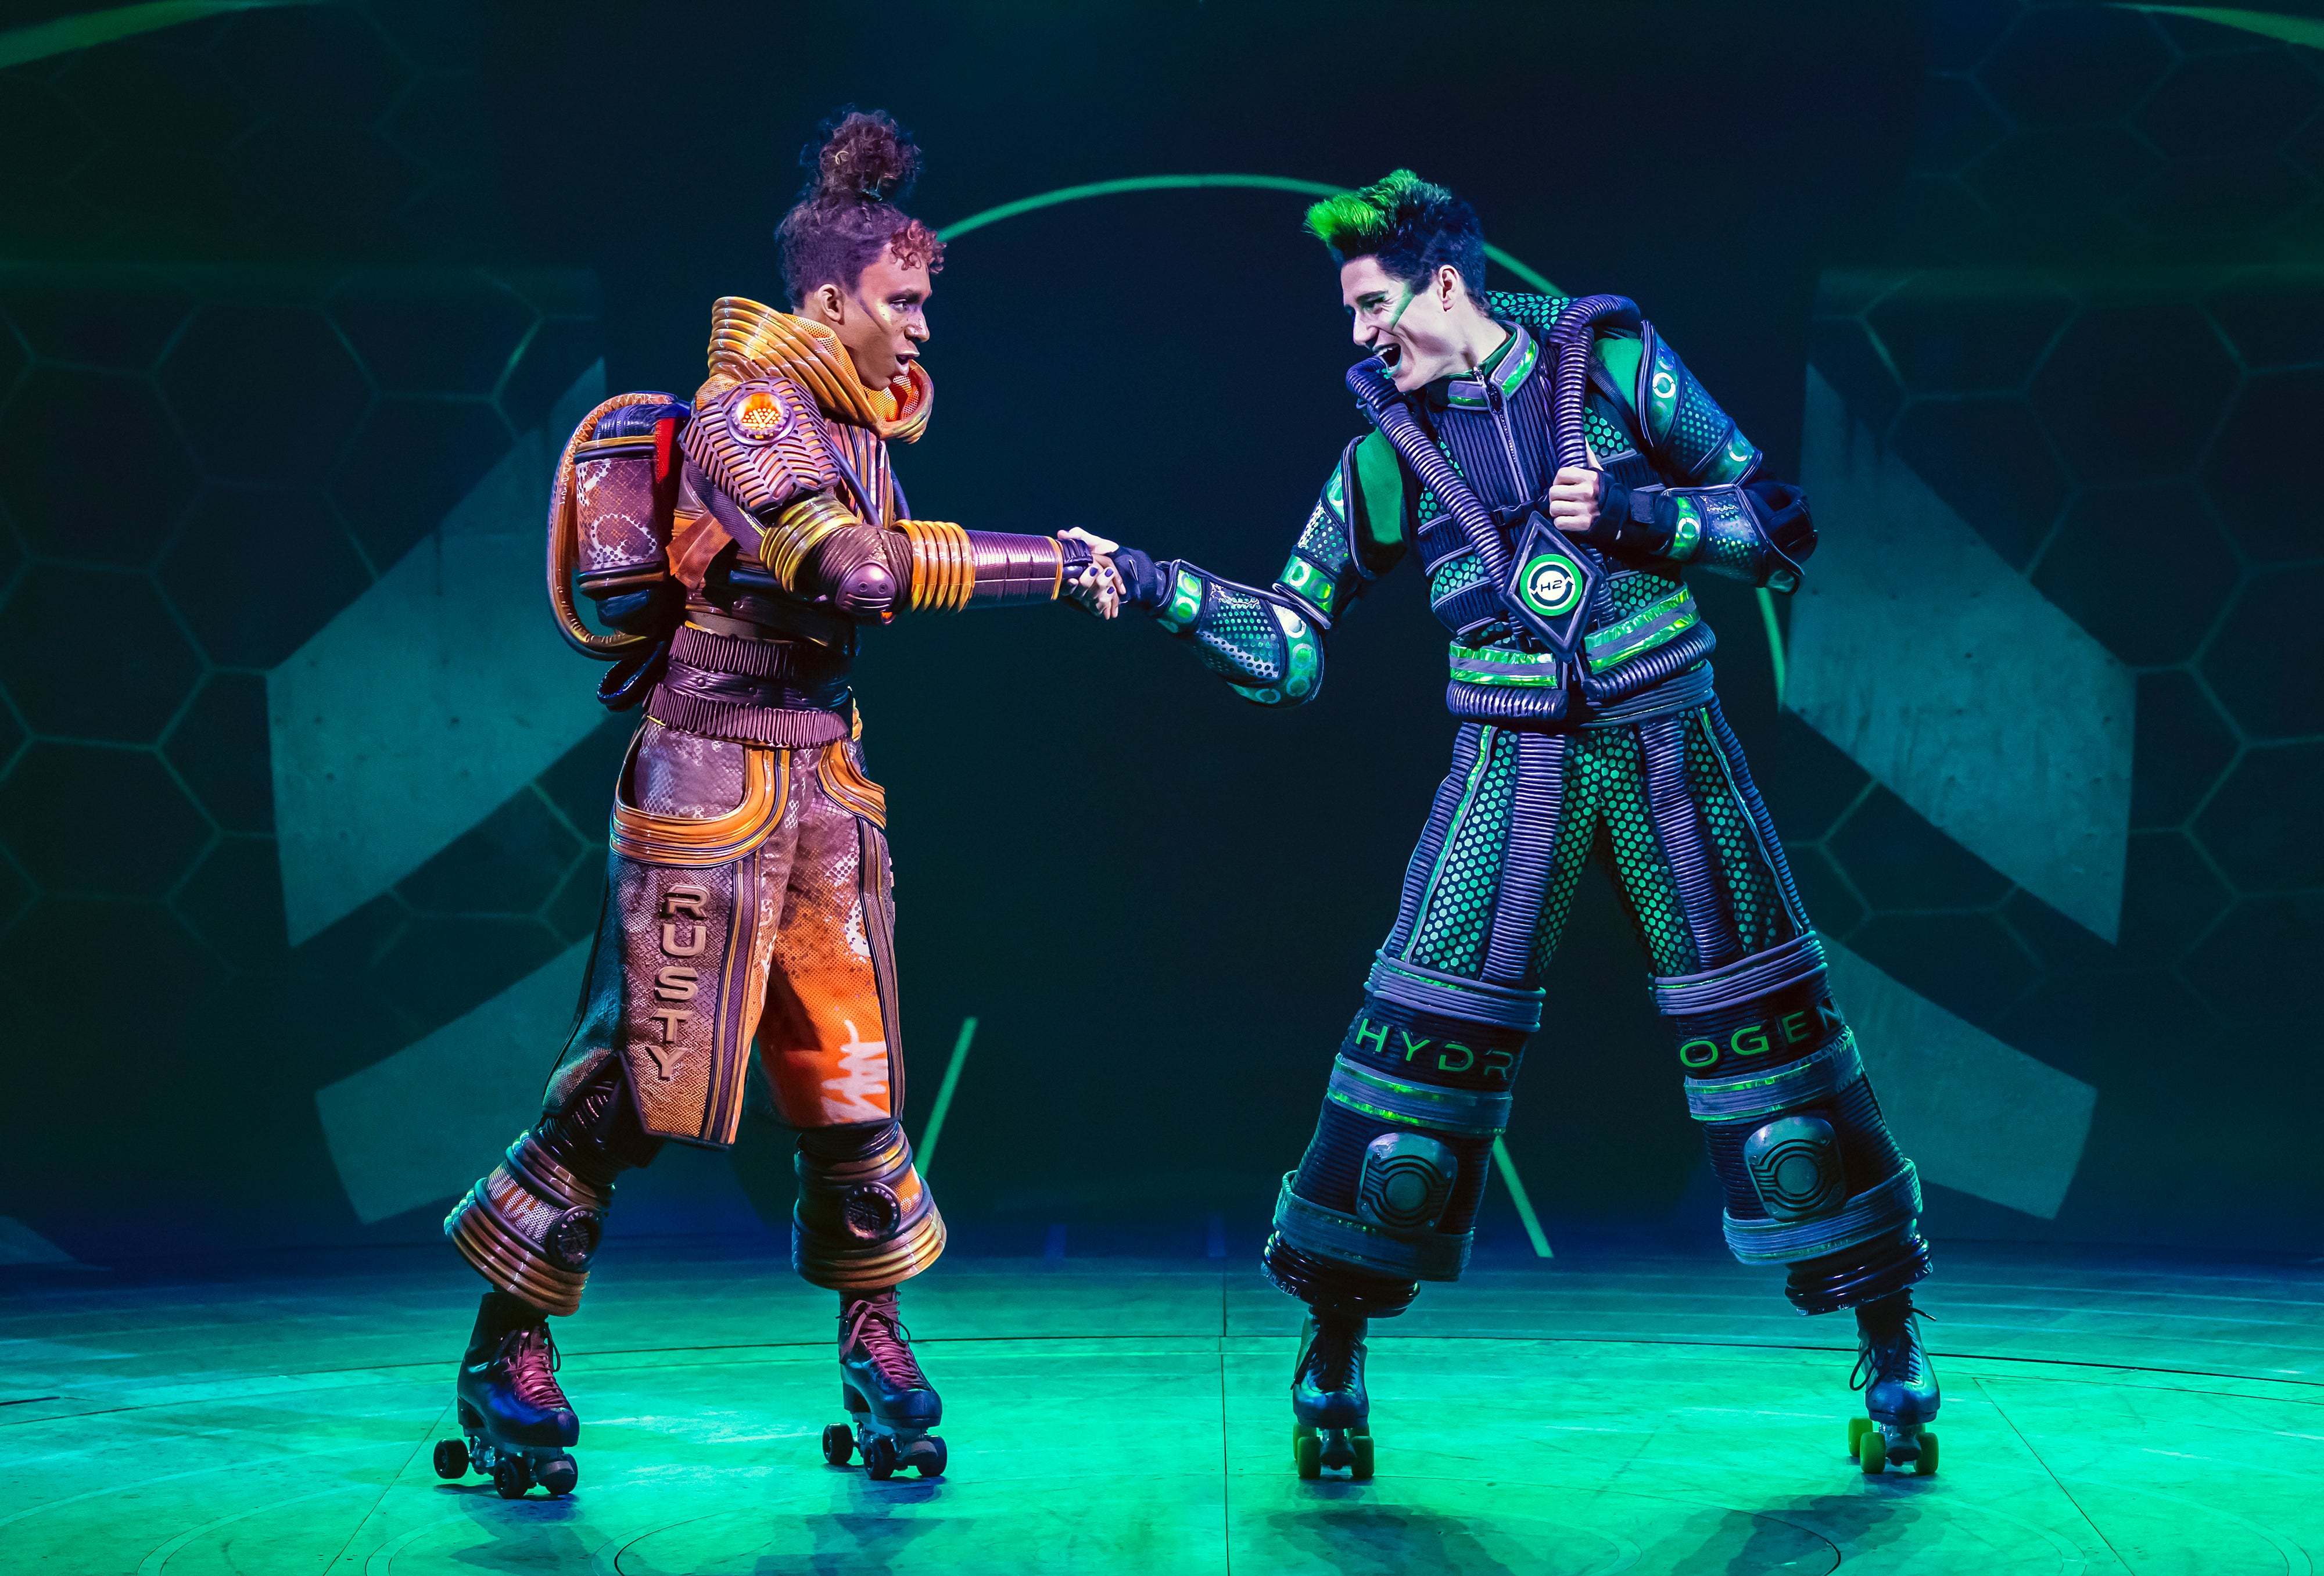 andrew lloyd webber, musicals, starlight express review: a neon fever dream you’ll watch with your mouth wide open